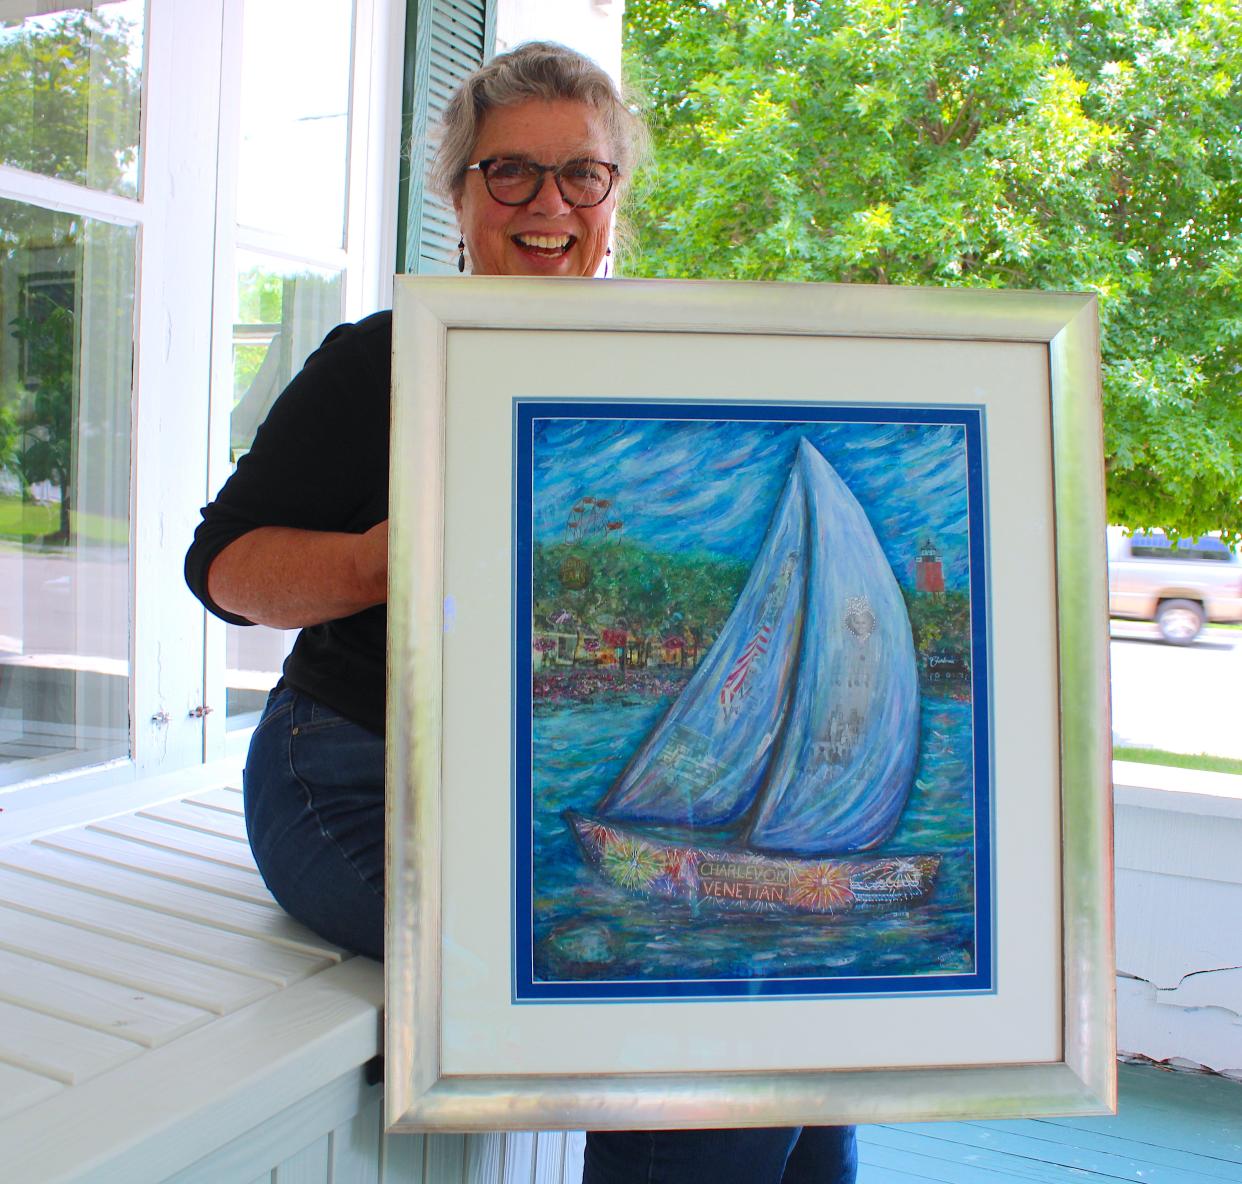 Gayle Levengood's artwork has been chosen for this year's Venetian Festival.